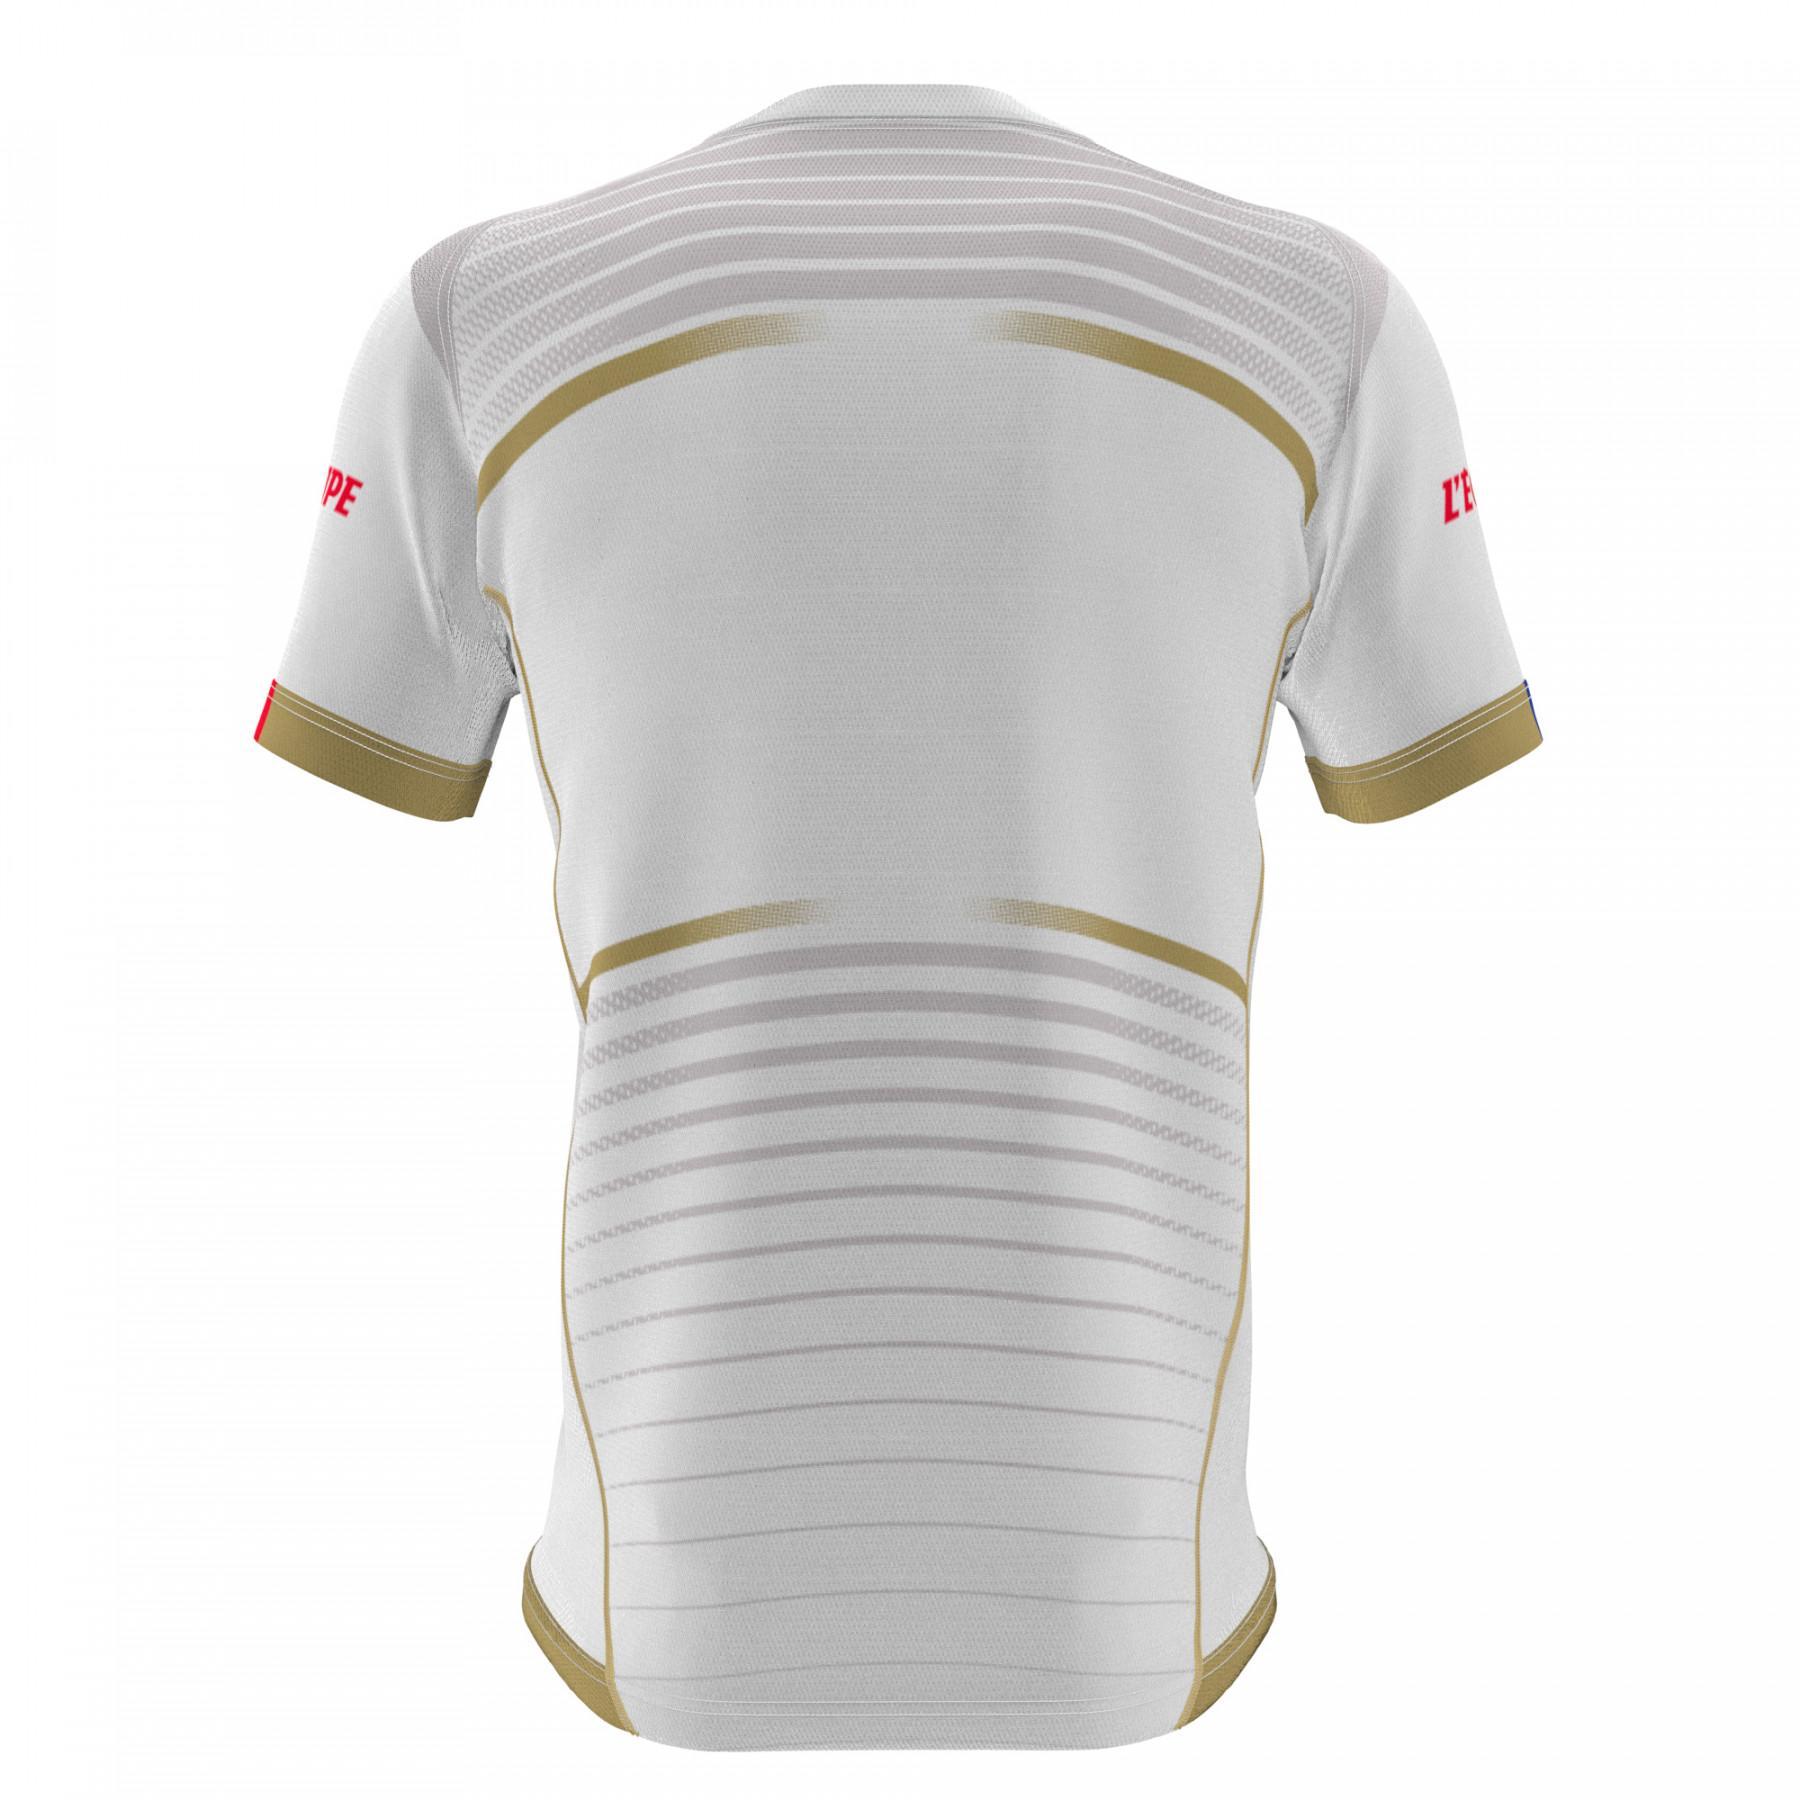 Outdoor jersey from France Volley 2019